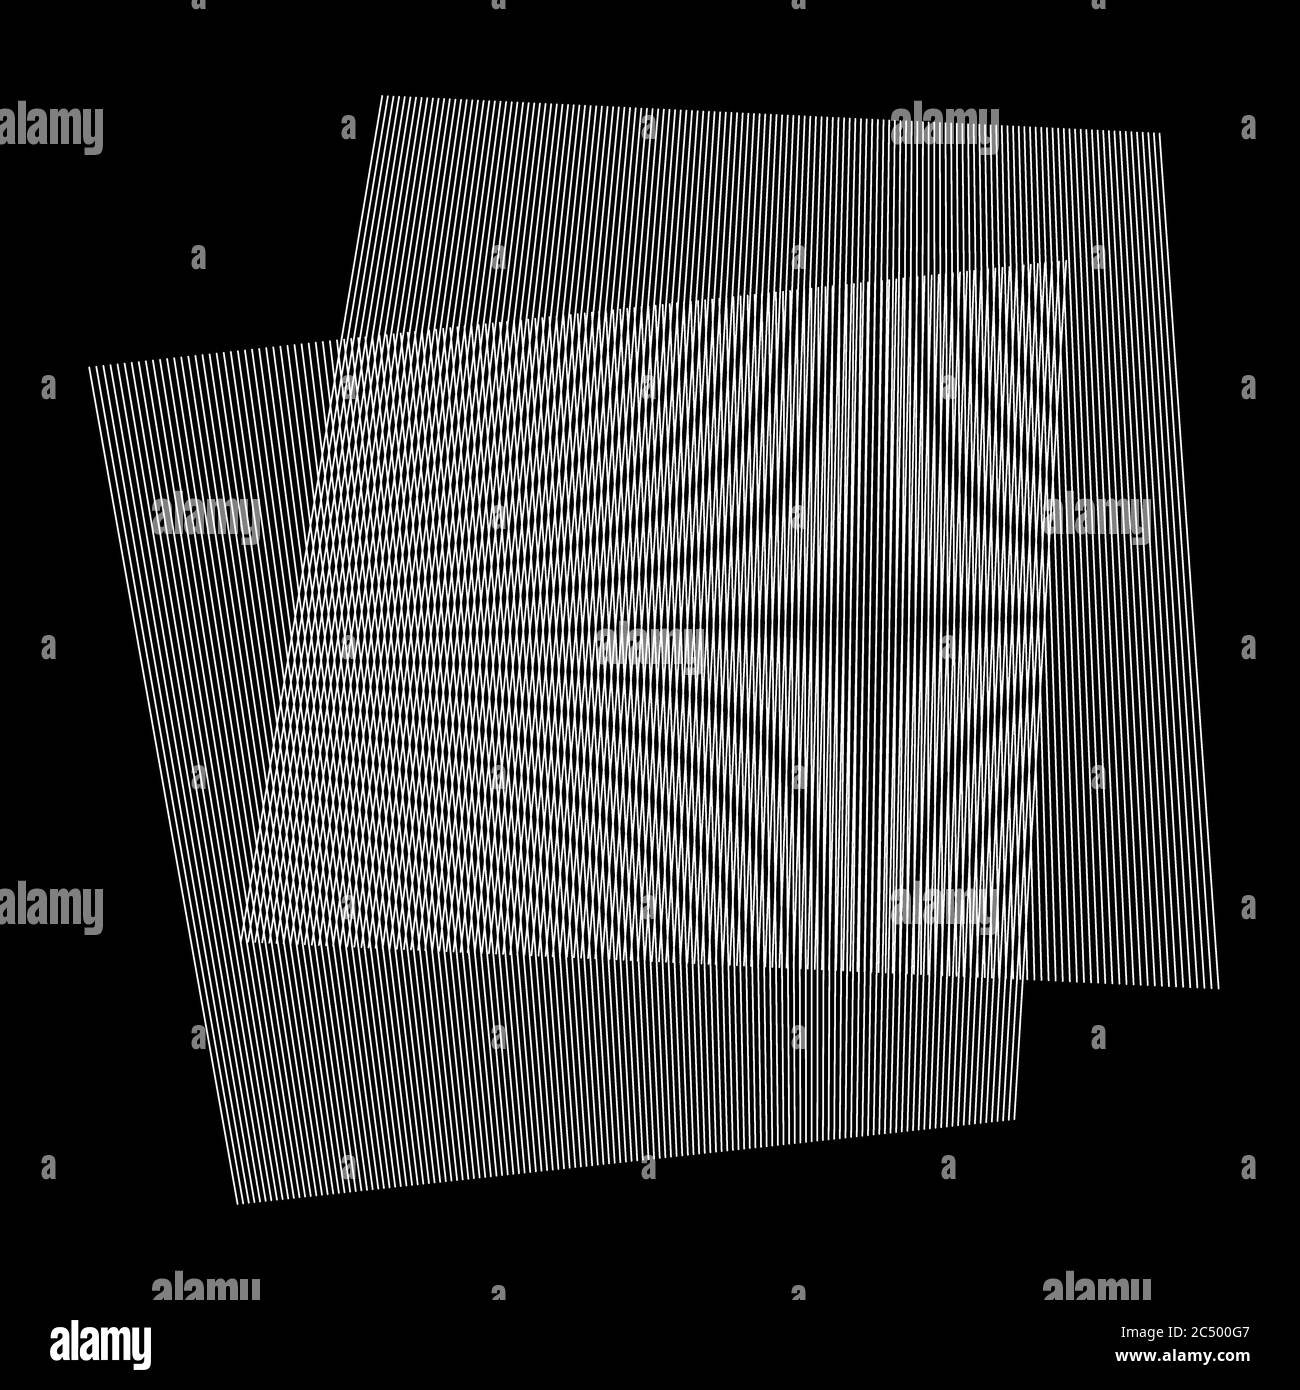 Moiré pattern by two overlapping lined surfaces. Moire effect or interference patterns on black background. Stock Photo